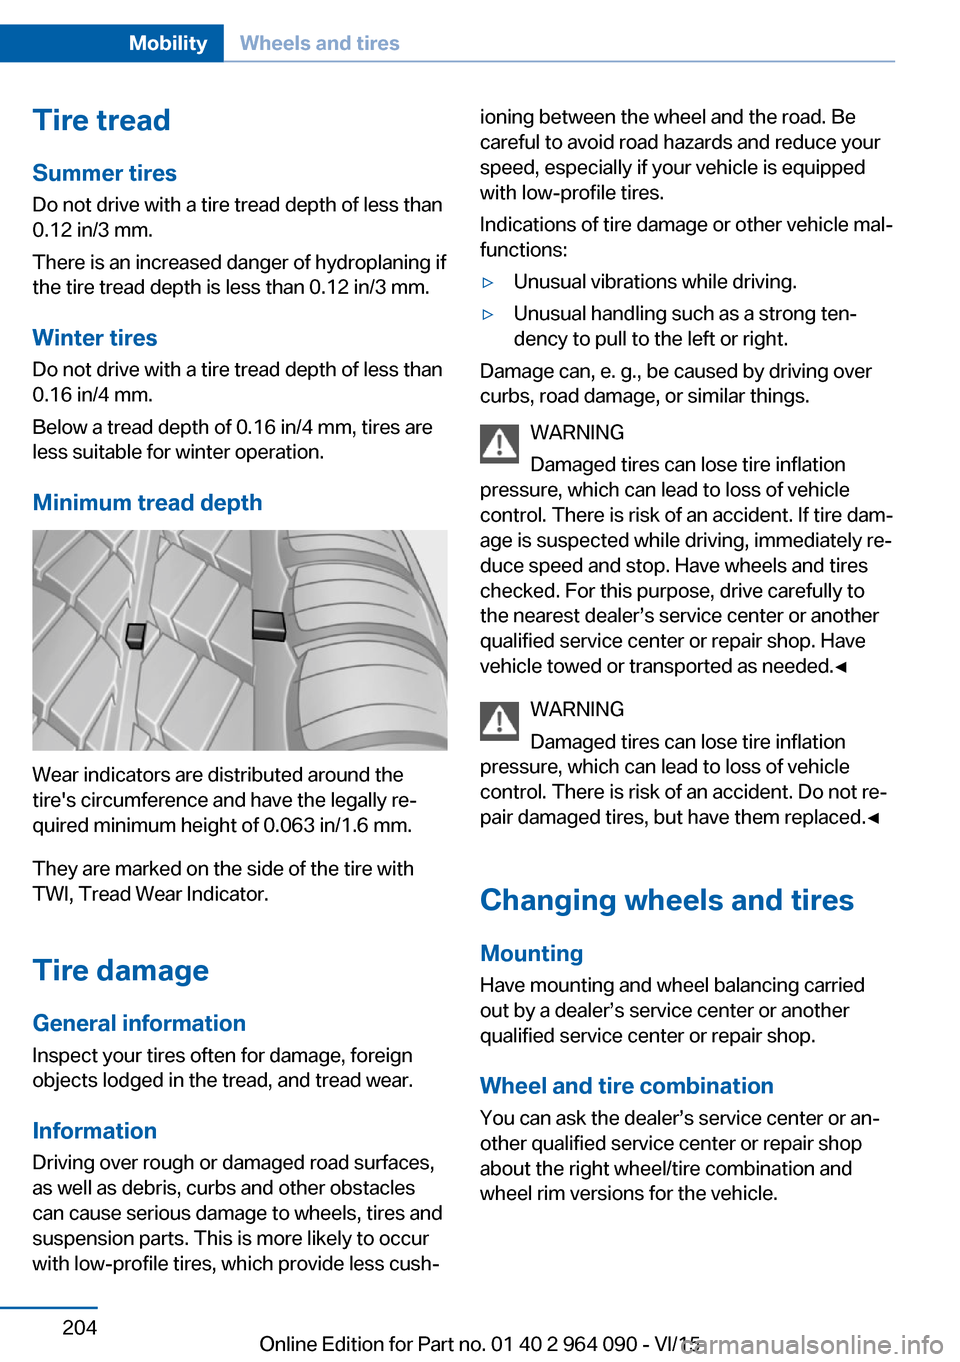 BMW X5M 2016 F85 Owners Manual Tire treadSummer tires
Do not drive with a tire tread depth of less than
0.12 in/3 mm.
There is an increased danger of hydroplaning if
the tire tread depth is less than 0.12 in/3 mm.
Winter tires
Do n